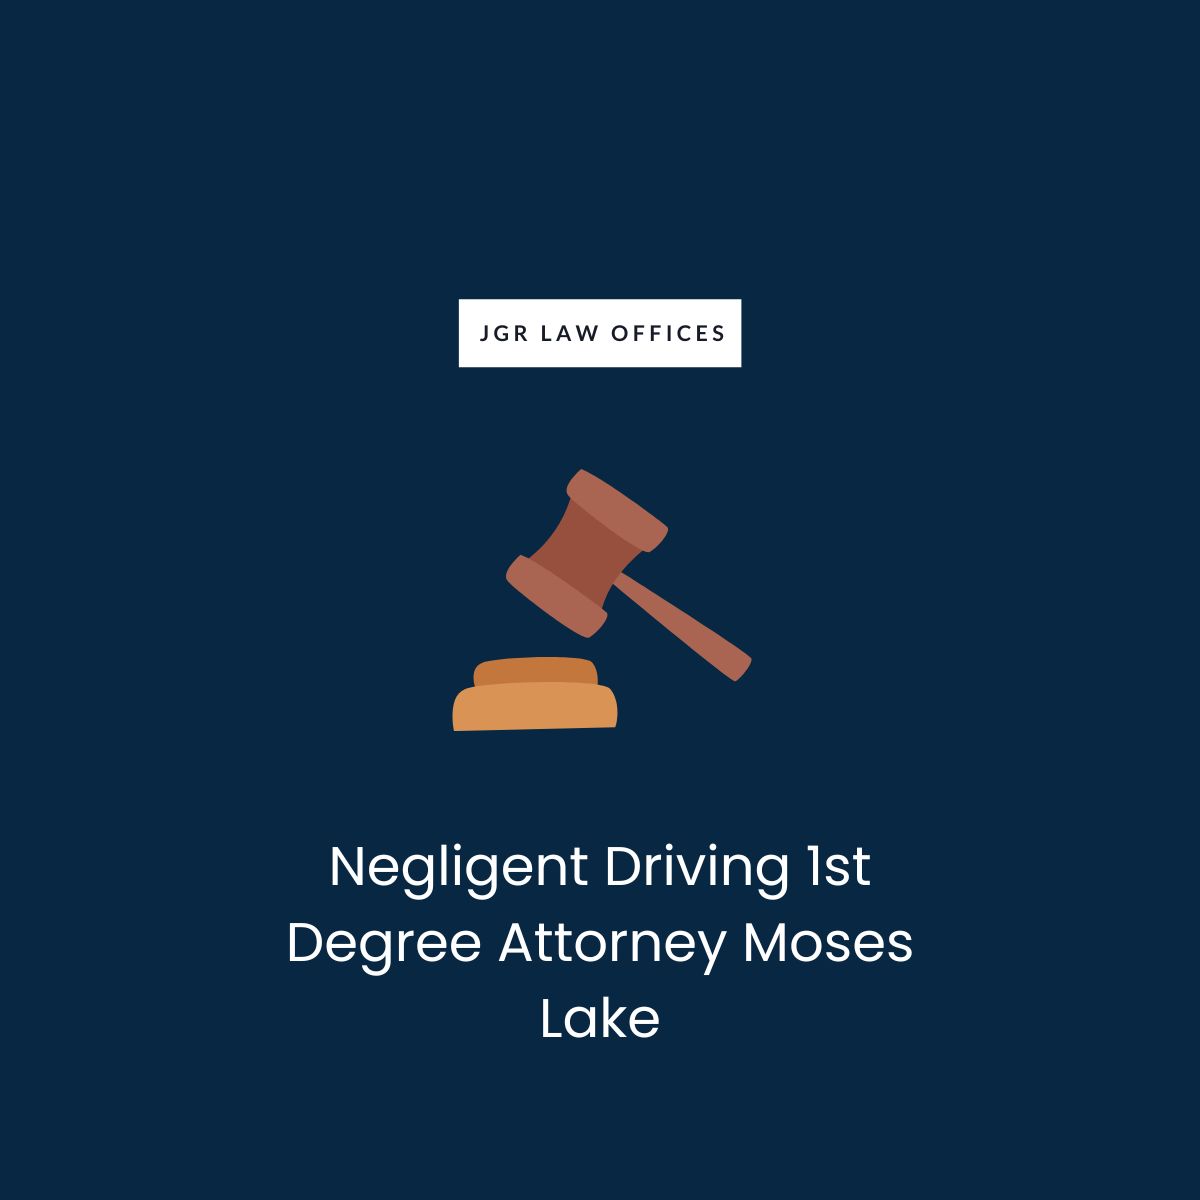 Negligent Driving 1st Degree Attorney Moses Lake